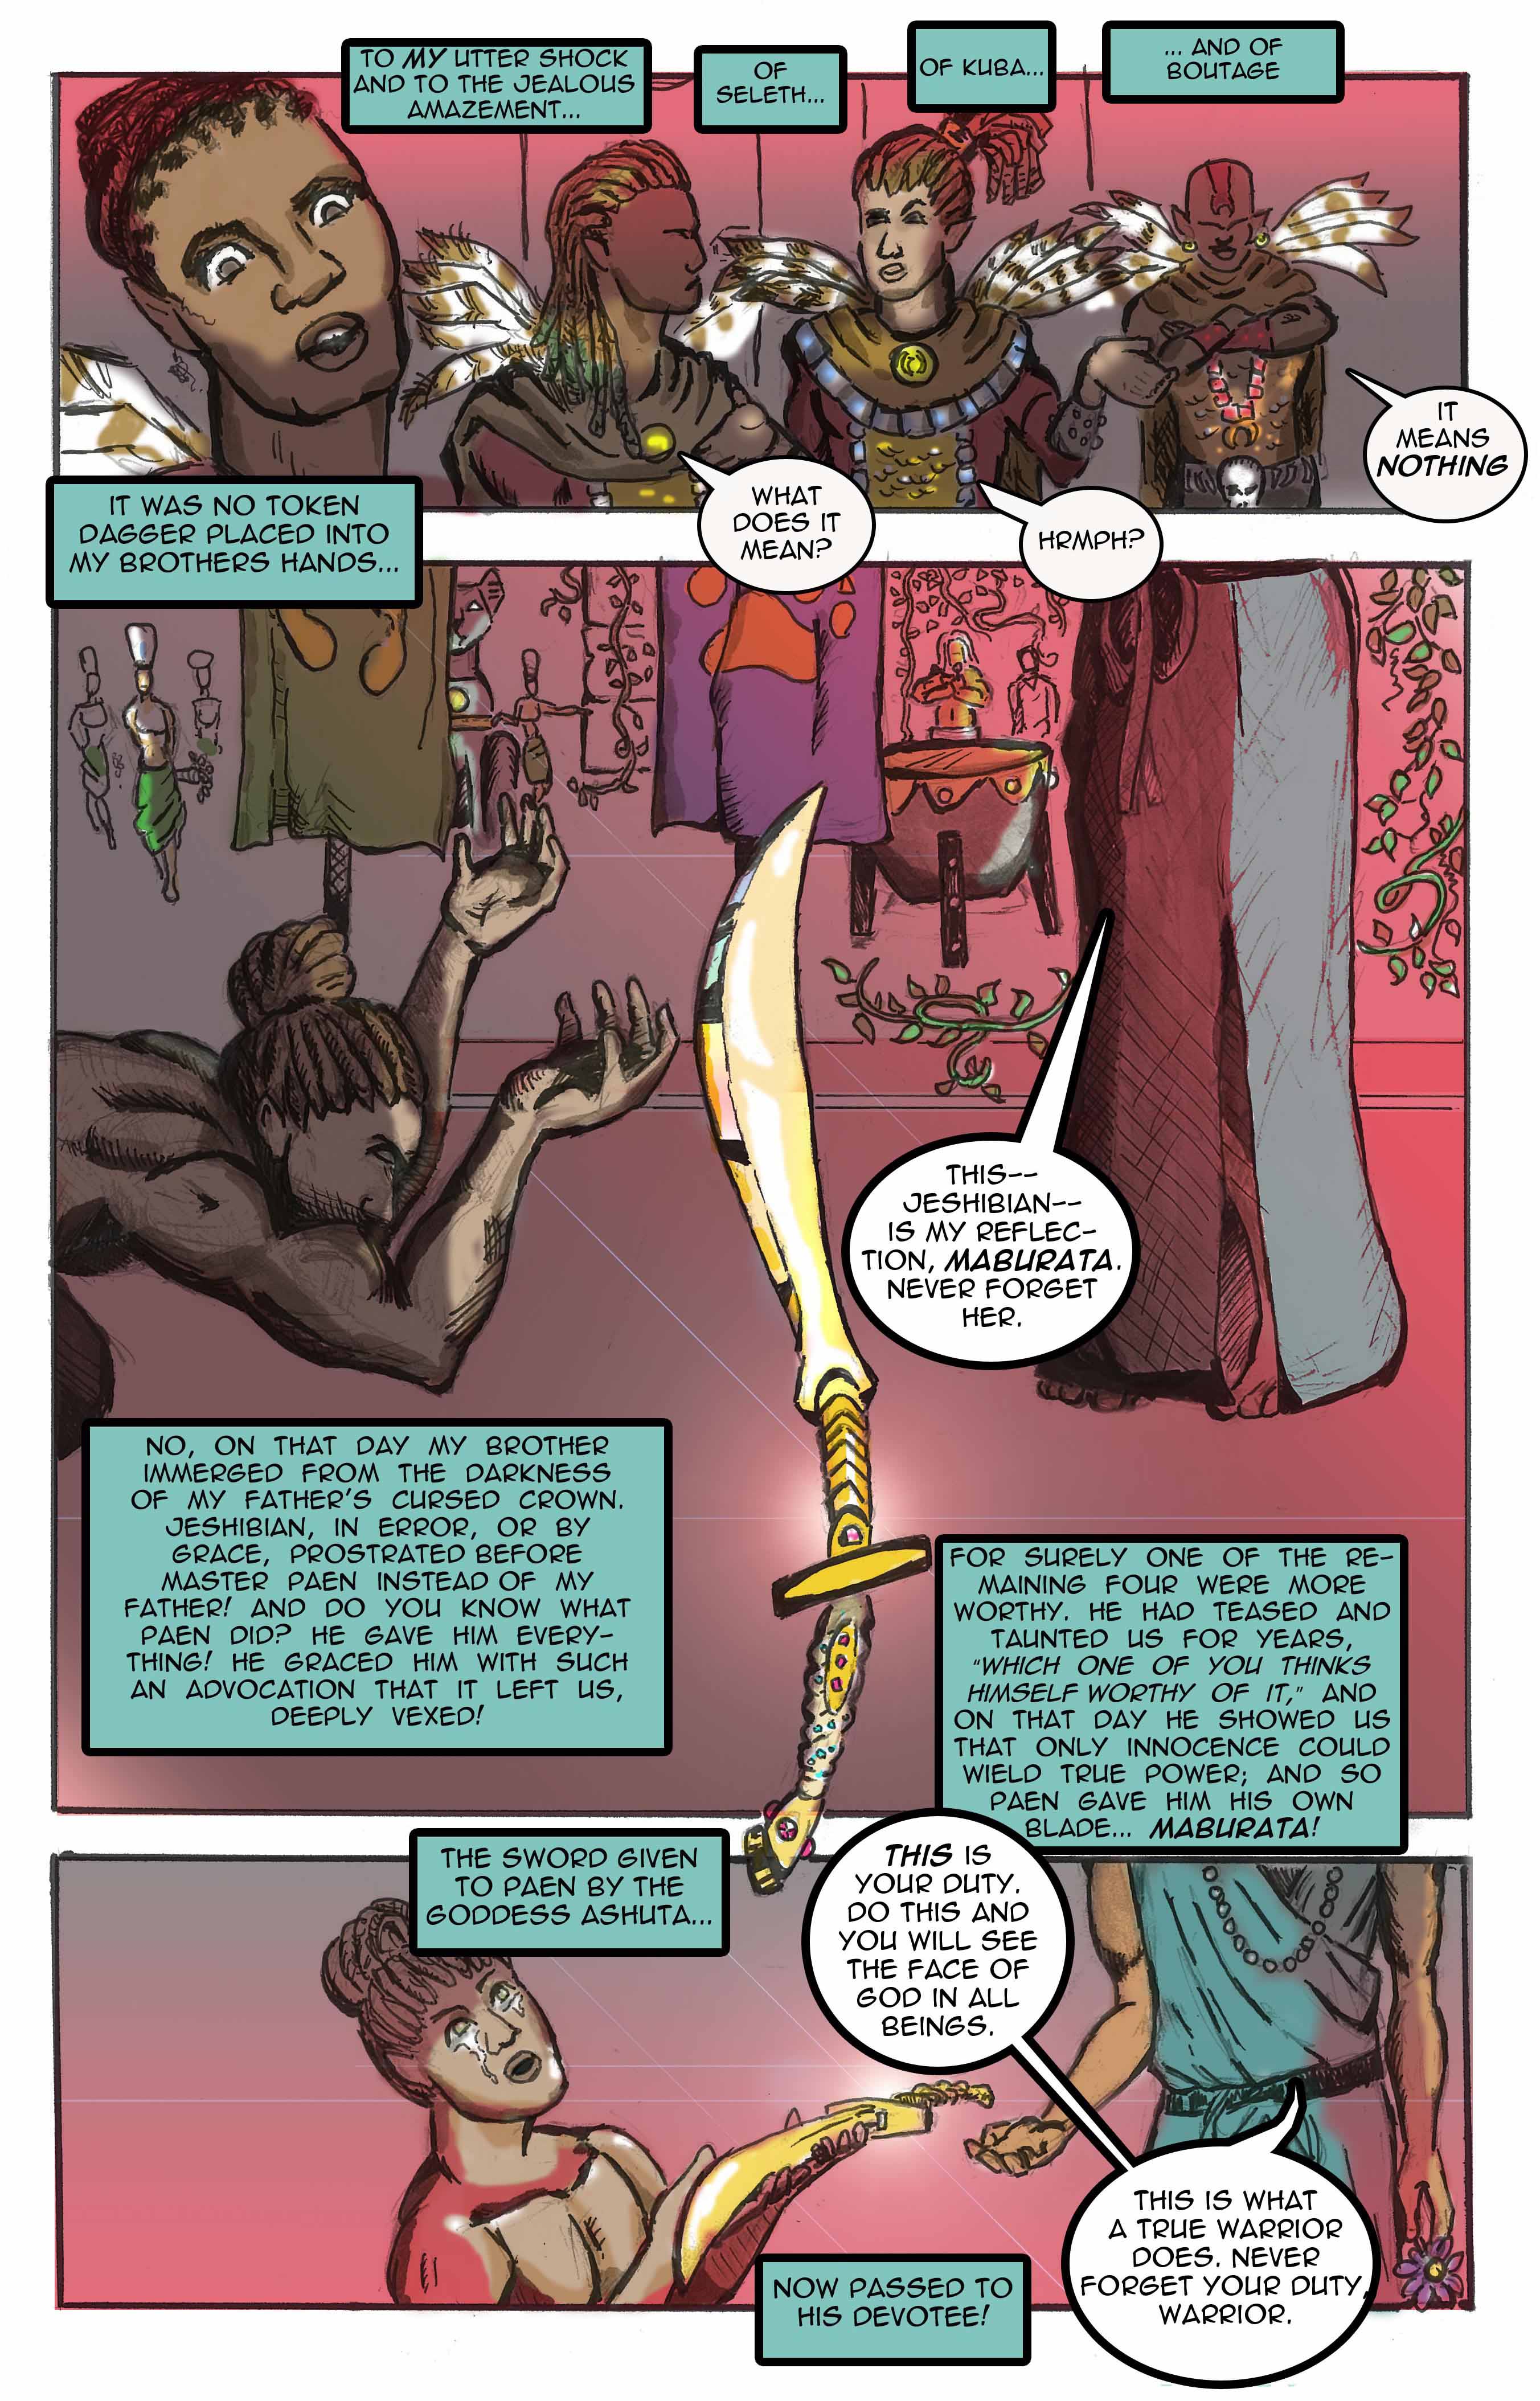 Dreamers of the Great One Land (page 13)